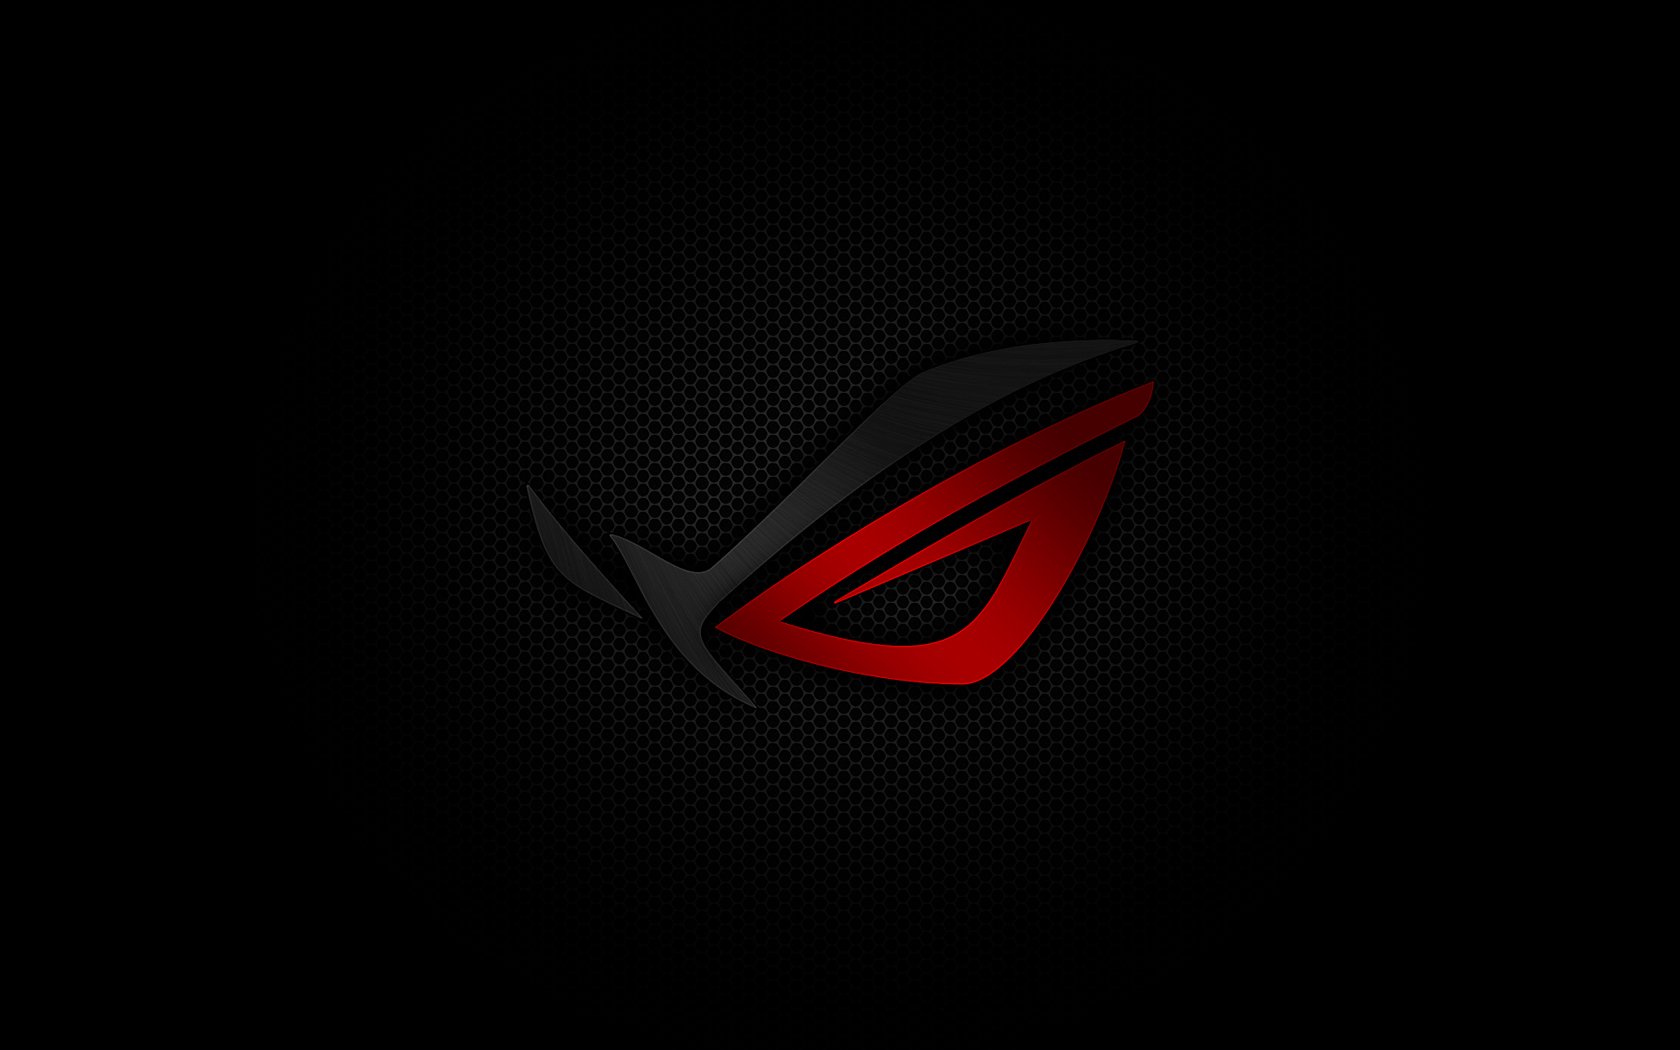 ASUS ROG Wallpaper Pack by BlaCkOuT1911